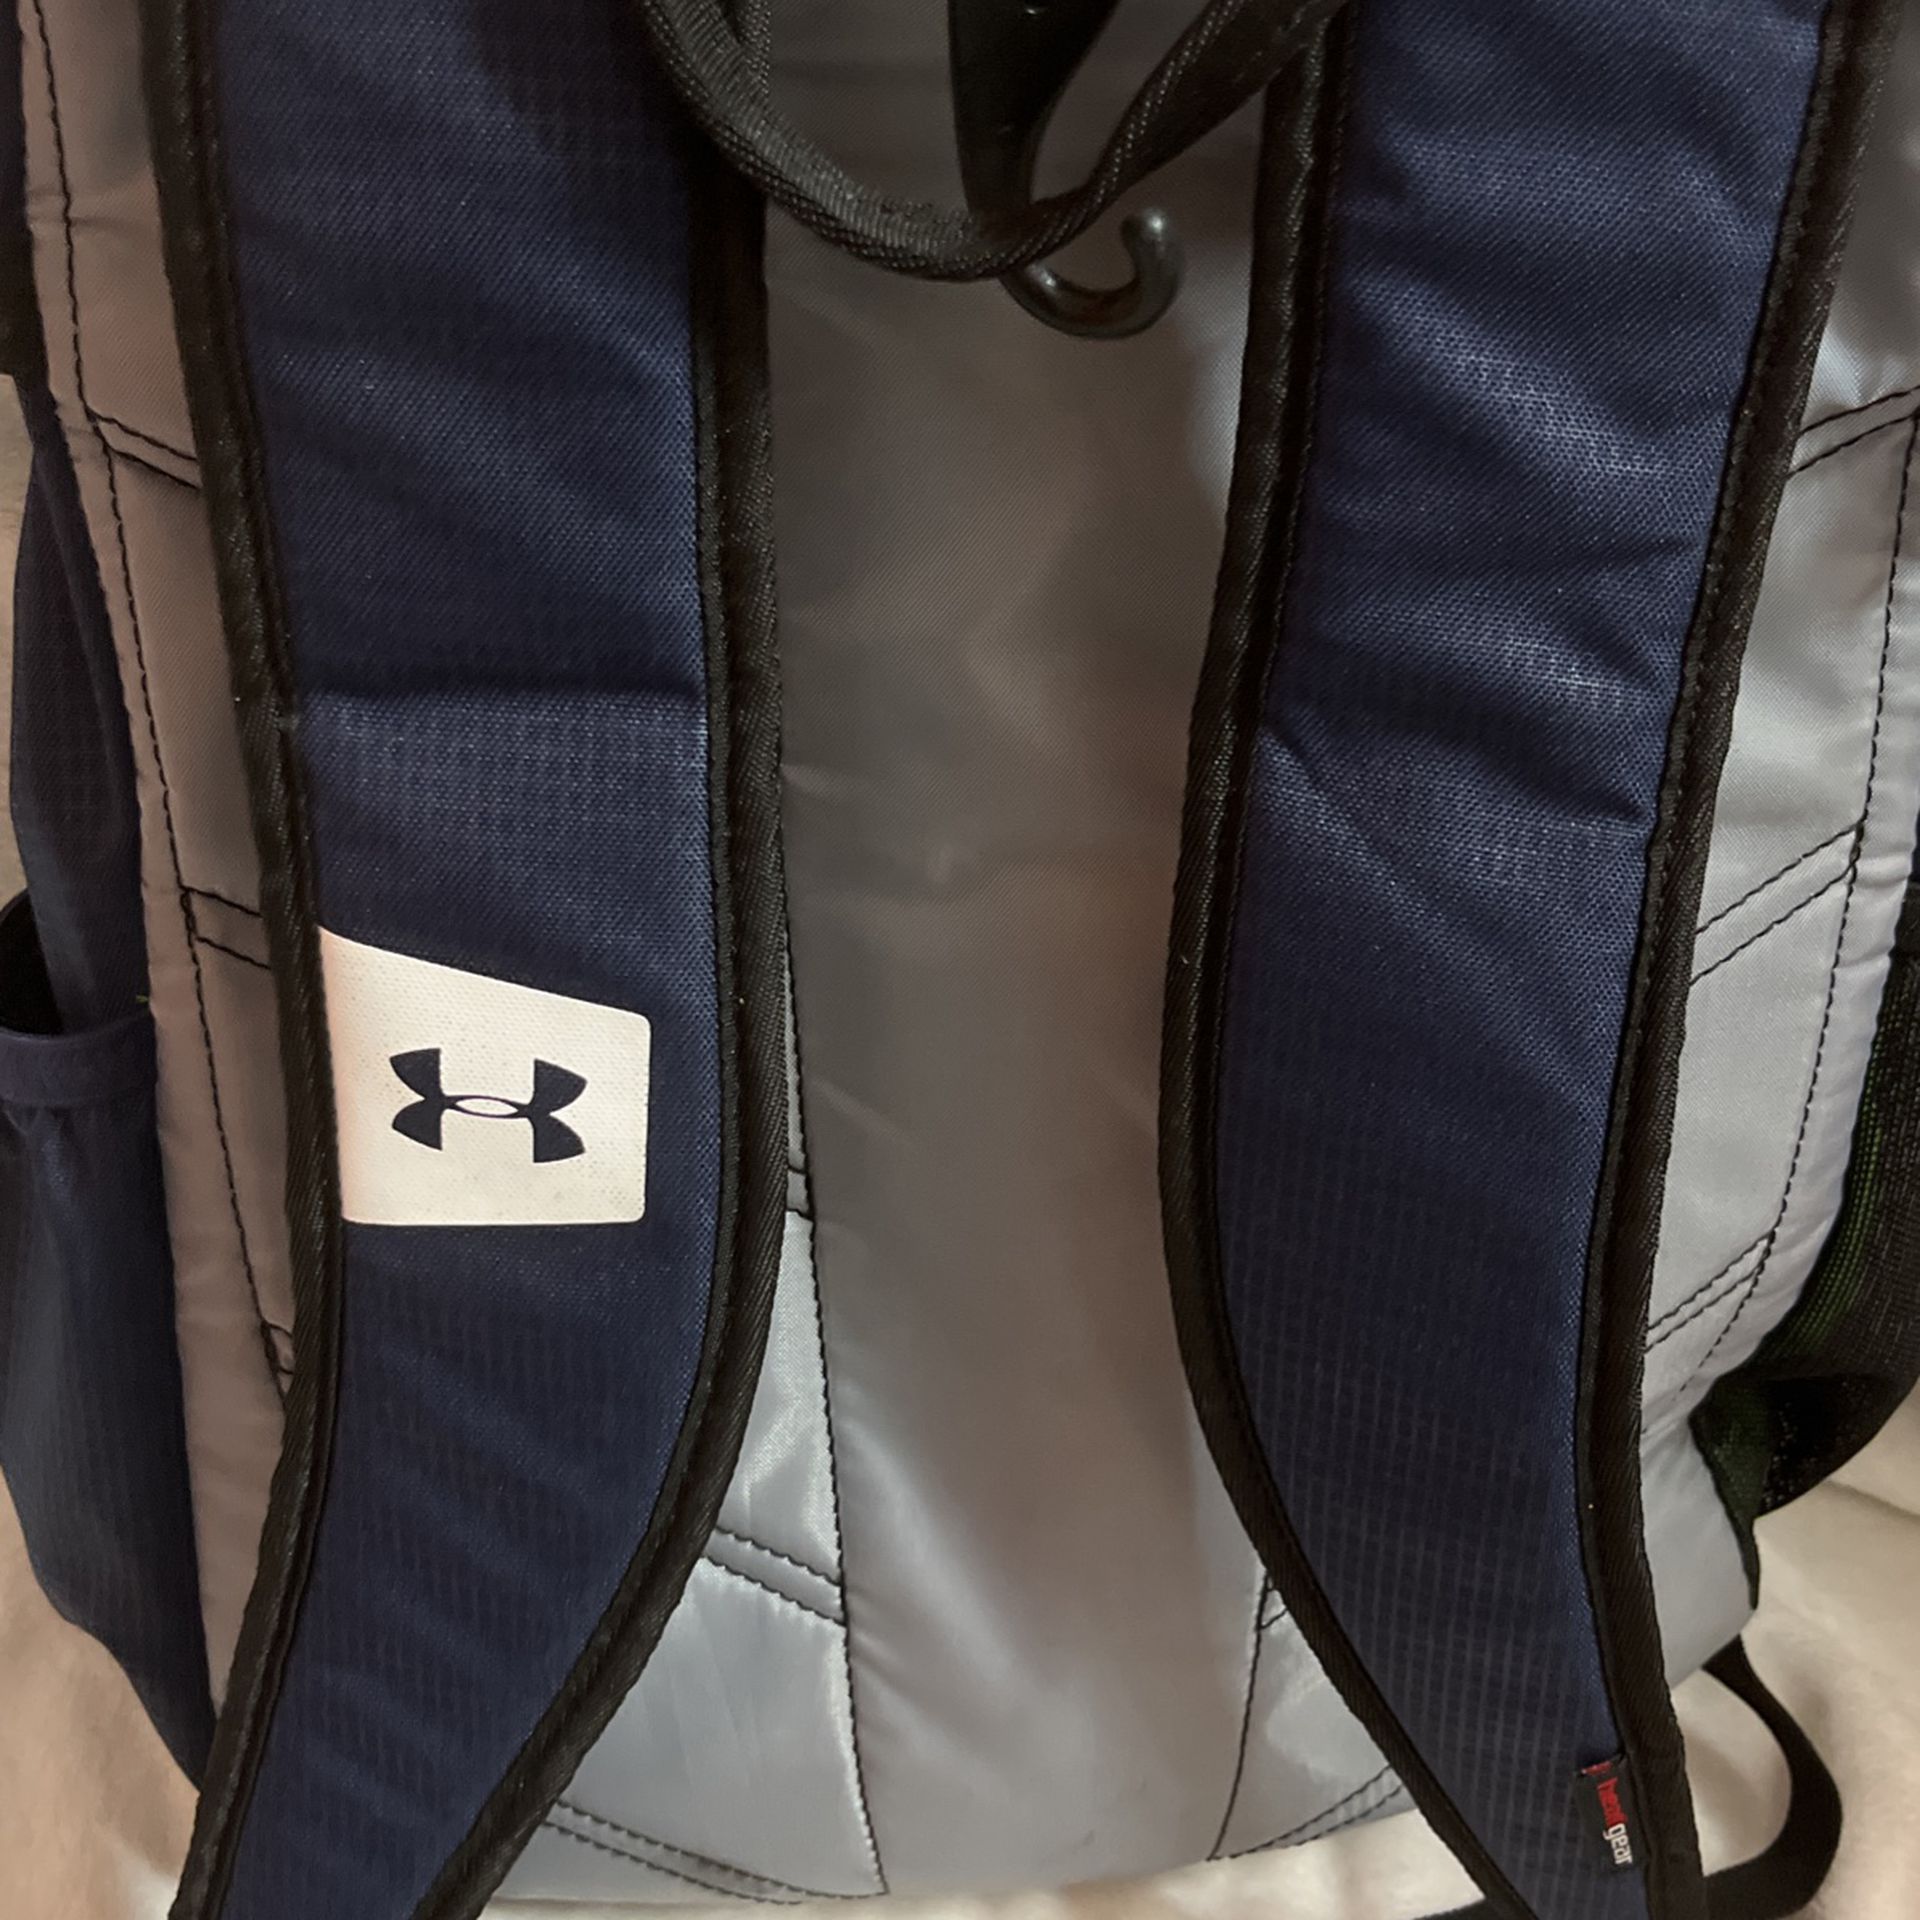 Under Armour  Youth Baseball Backpack with 8 Balls Included